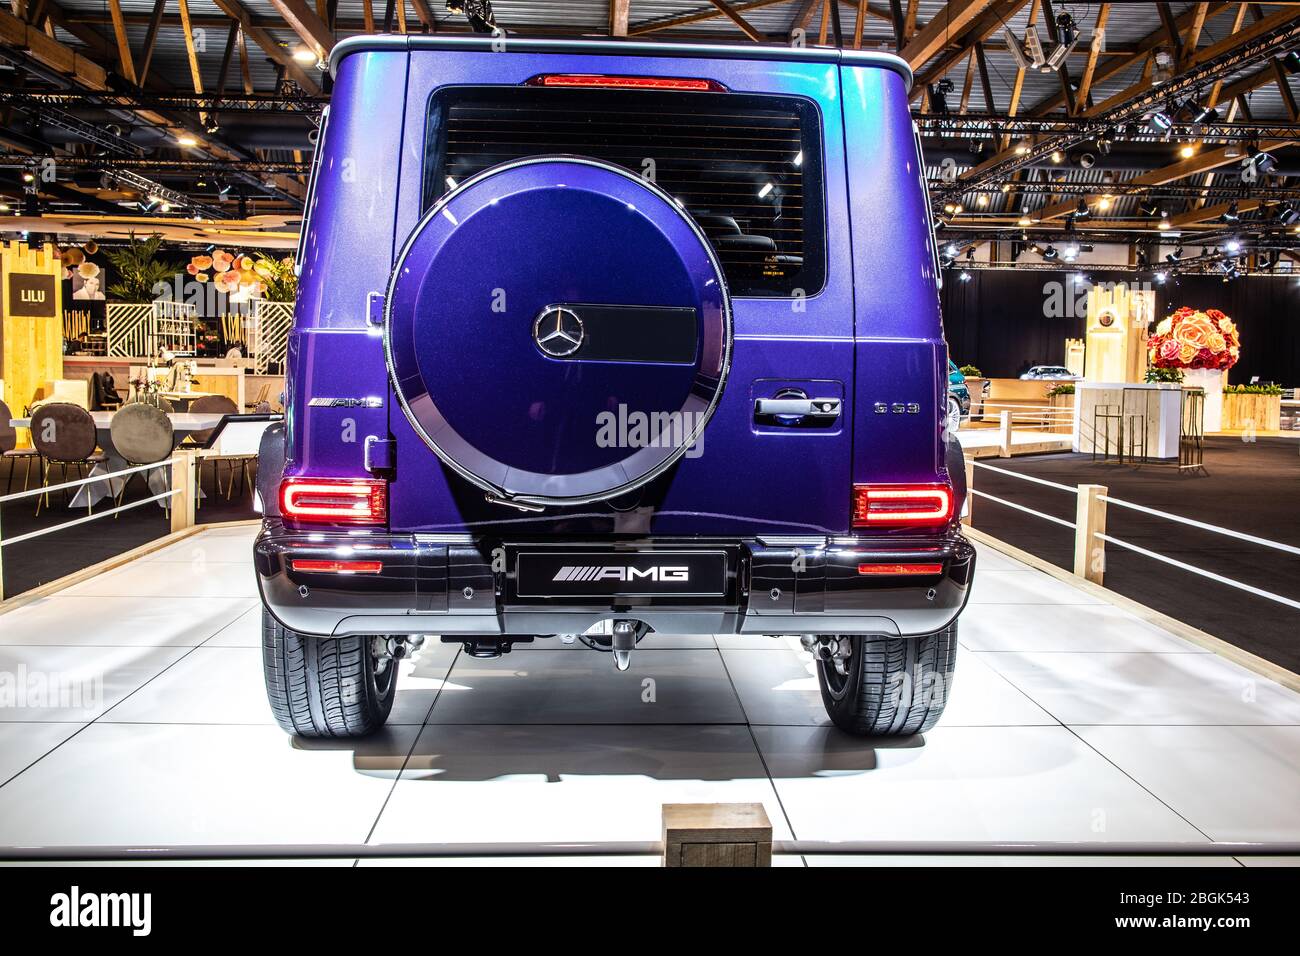 Brussels, Belgium, Jan 2020 Mercedes-AMG G 63 Exclusive Edition, Brussels Motor Show, 2nd gen, W463, G-class off-road car produced by Mercedes-Benz Stock Photo